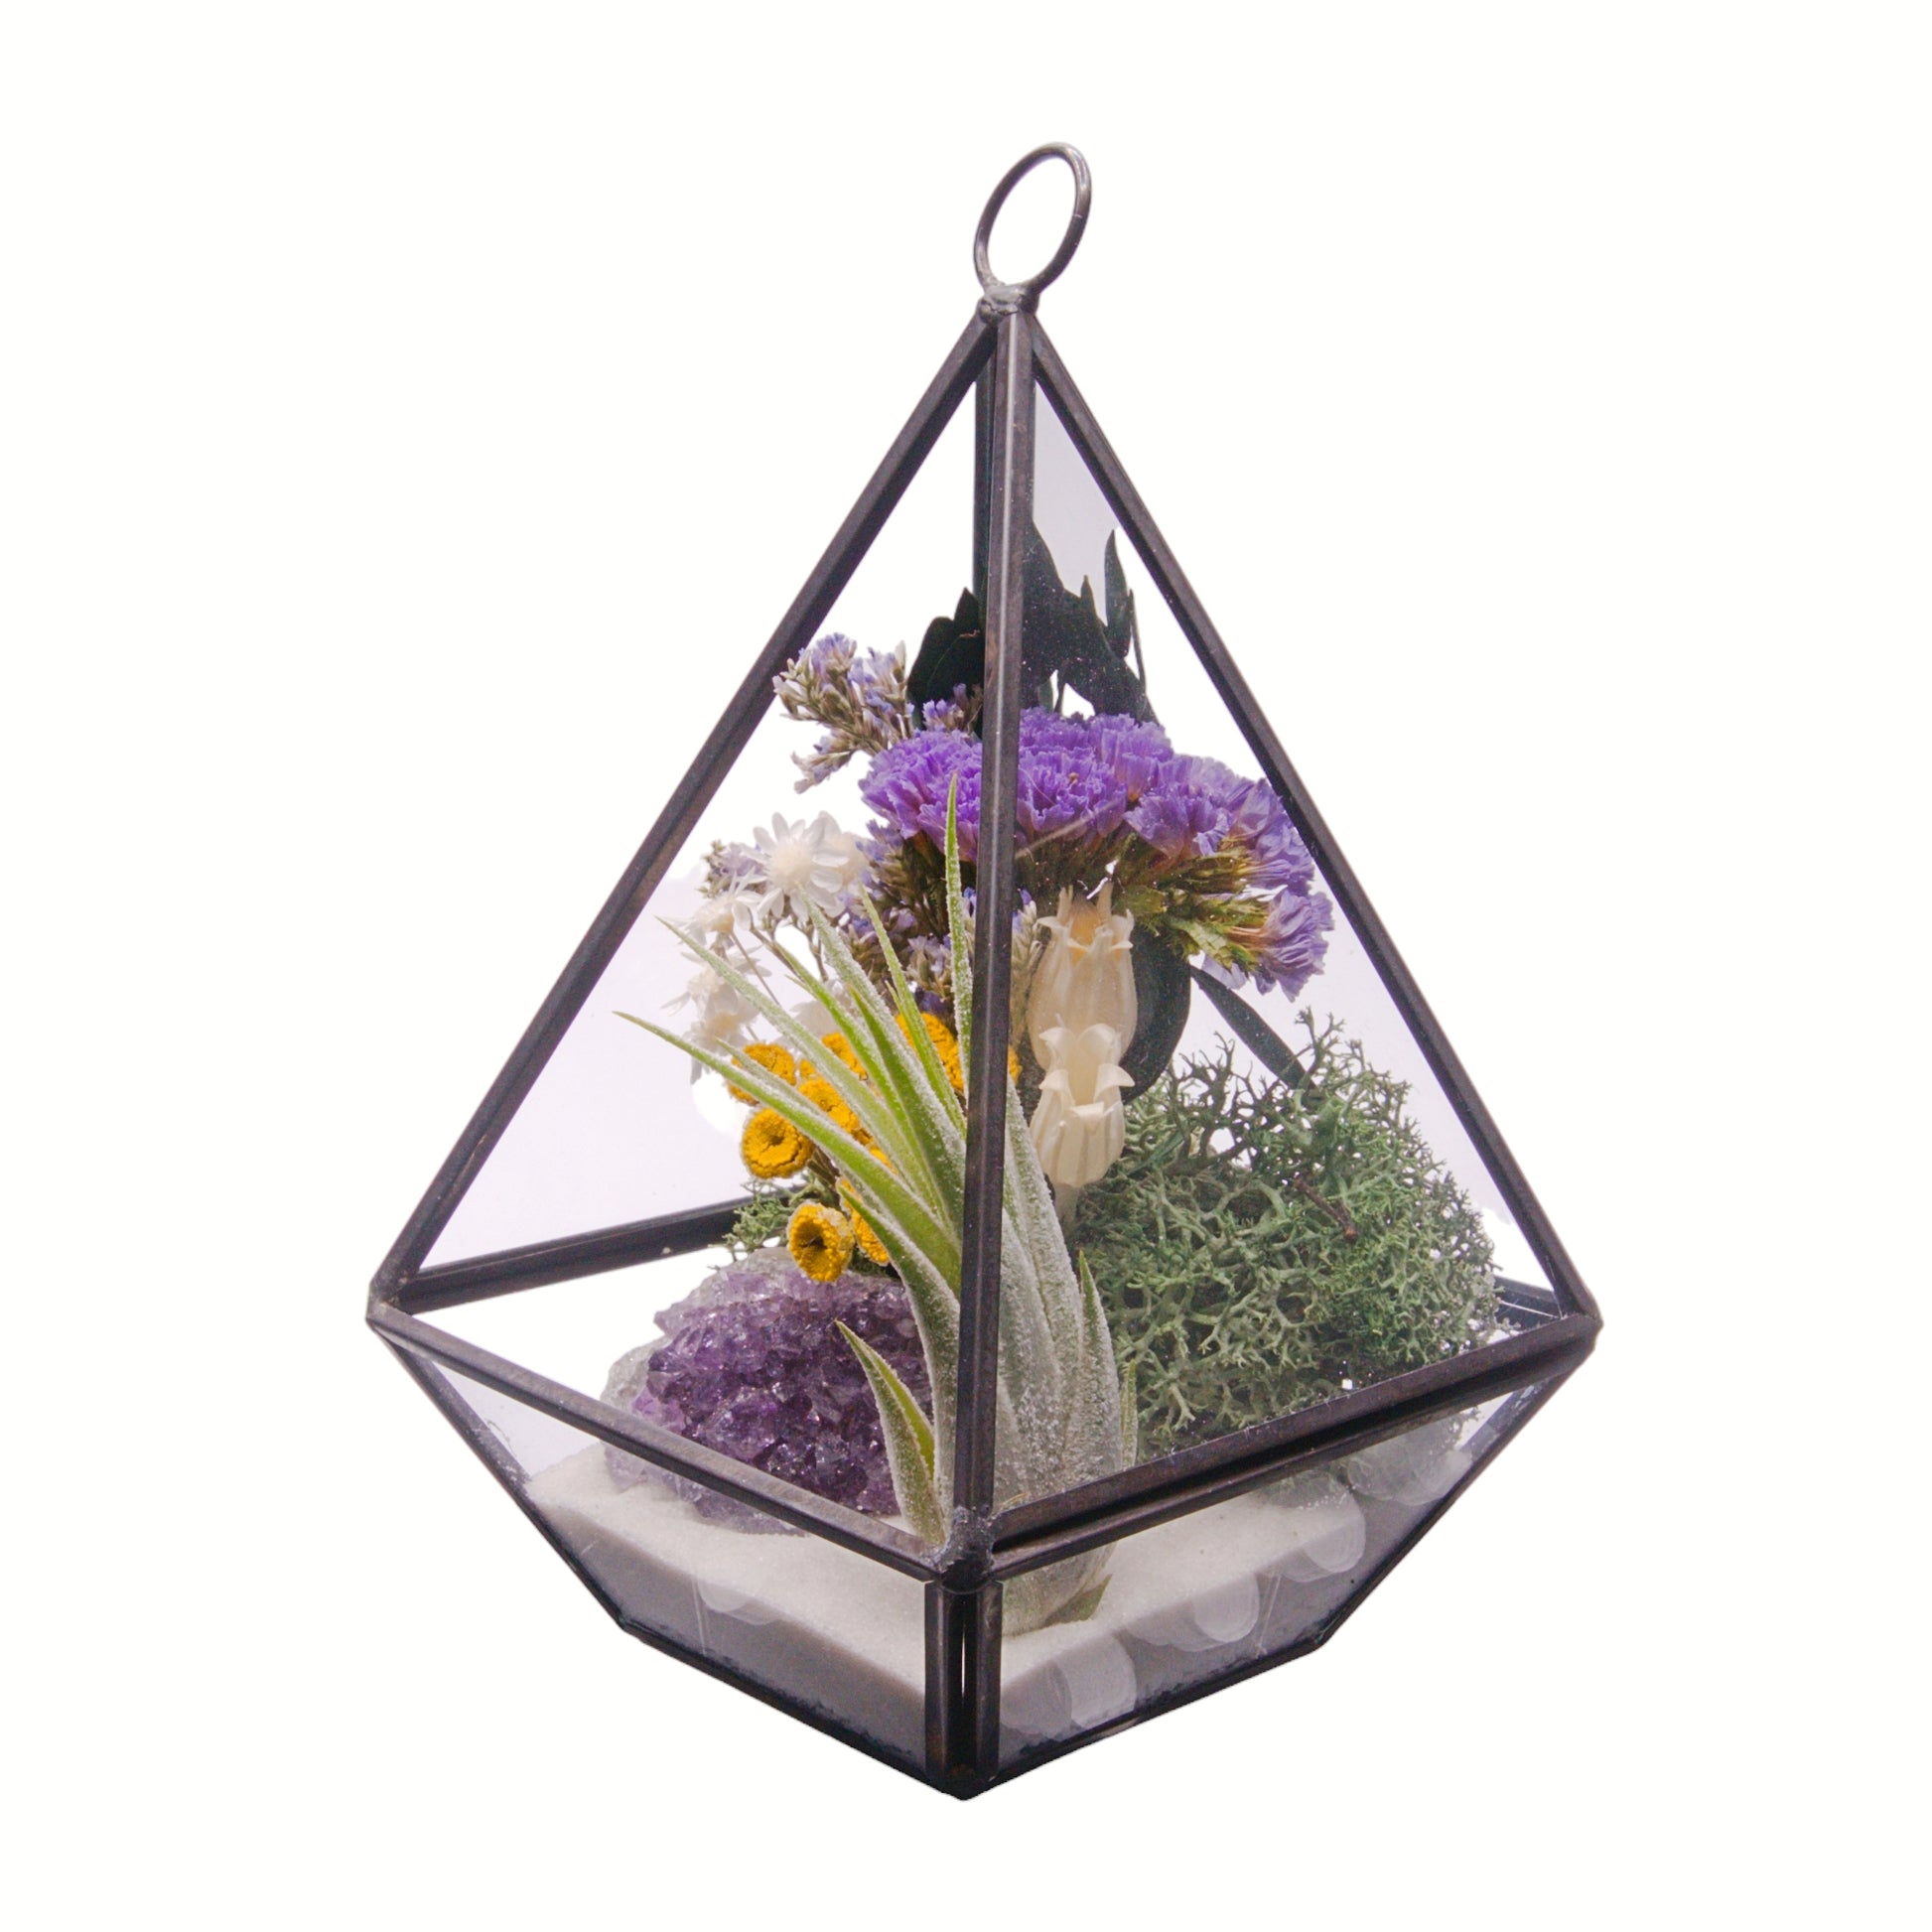 Black Victorian geometric terrarium with dried flowers, airplant and amethyst crystal